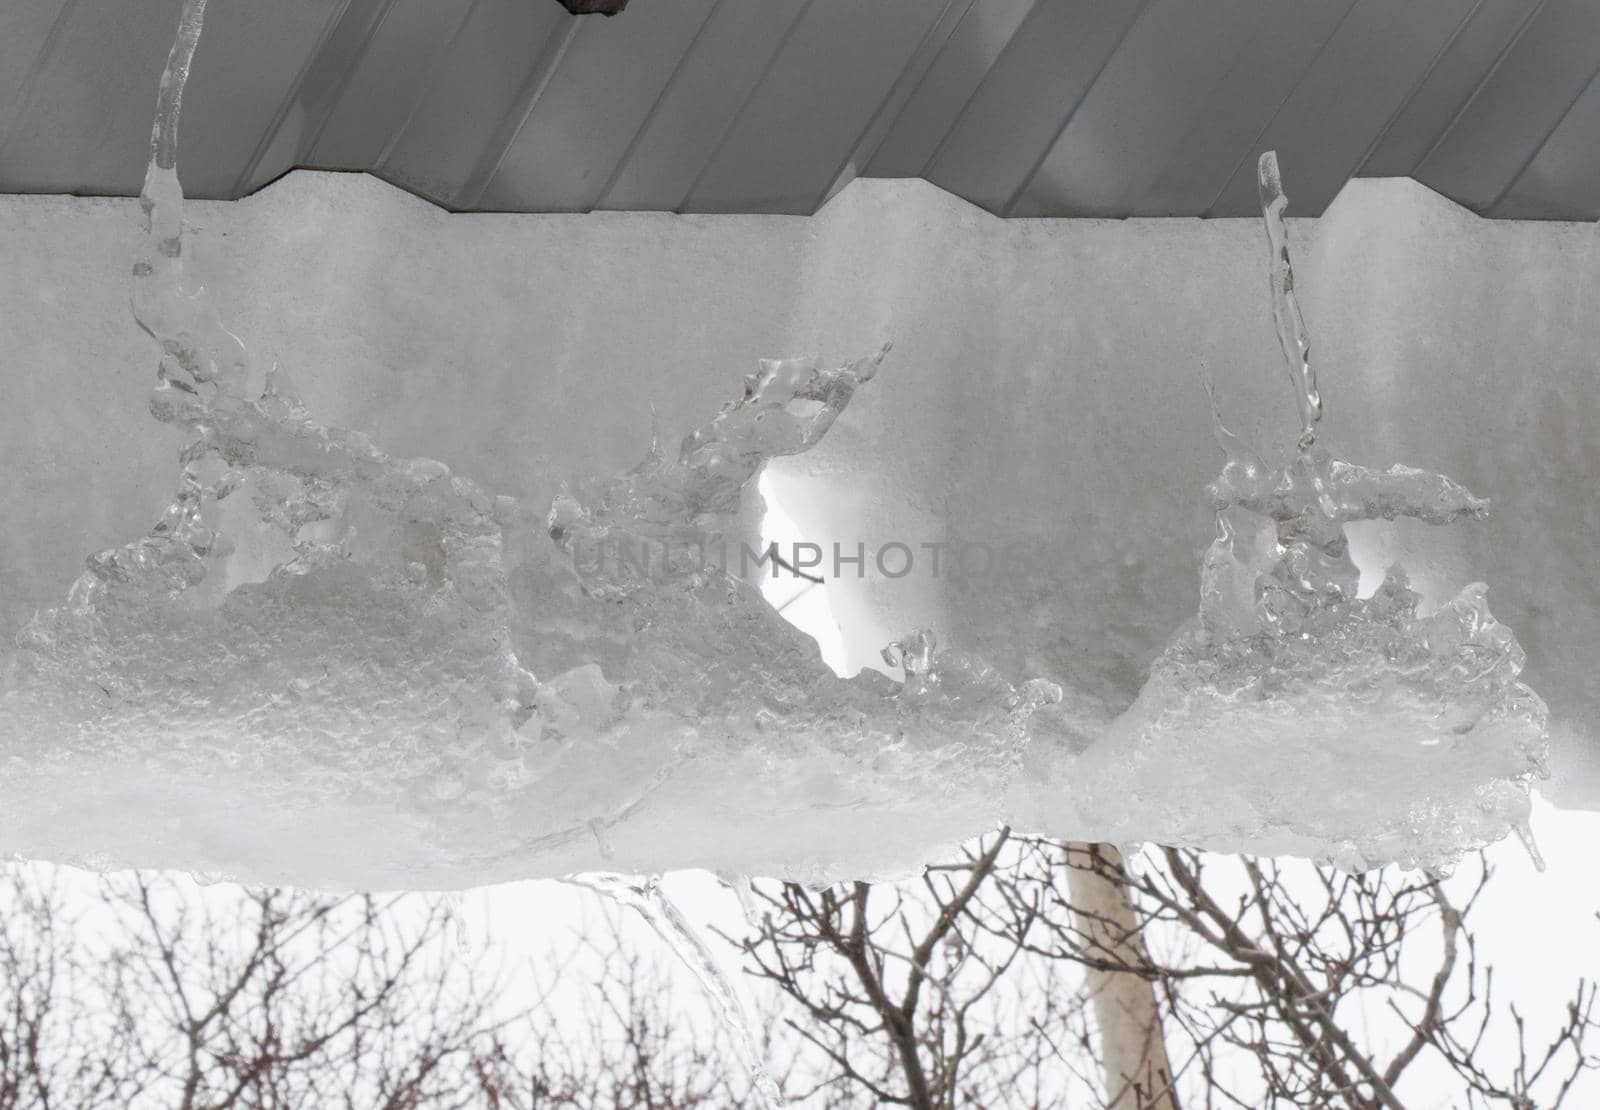 Icicles on the roof, white sky and iced water, winter by Taidundua